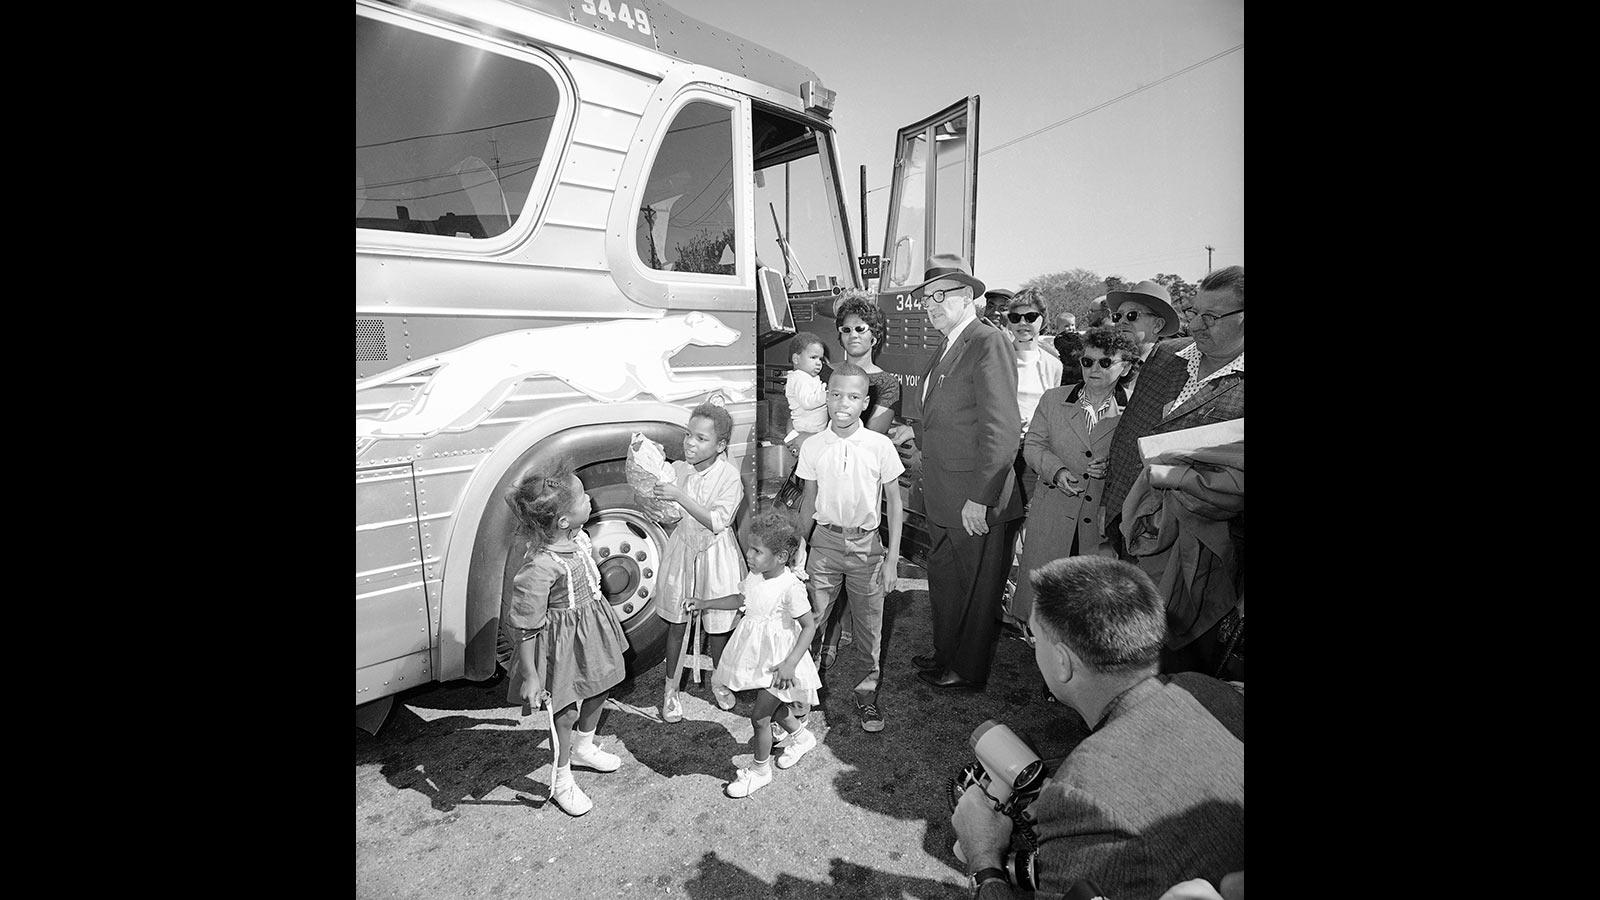 Frank C. Curtin, Reverse Freedom Riders was taken by Frank C. Curtin, Associated Press, 1962